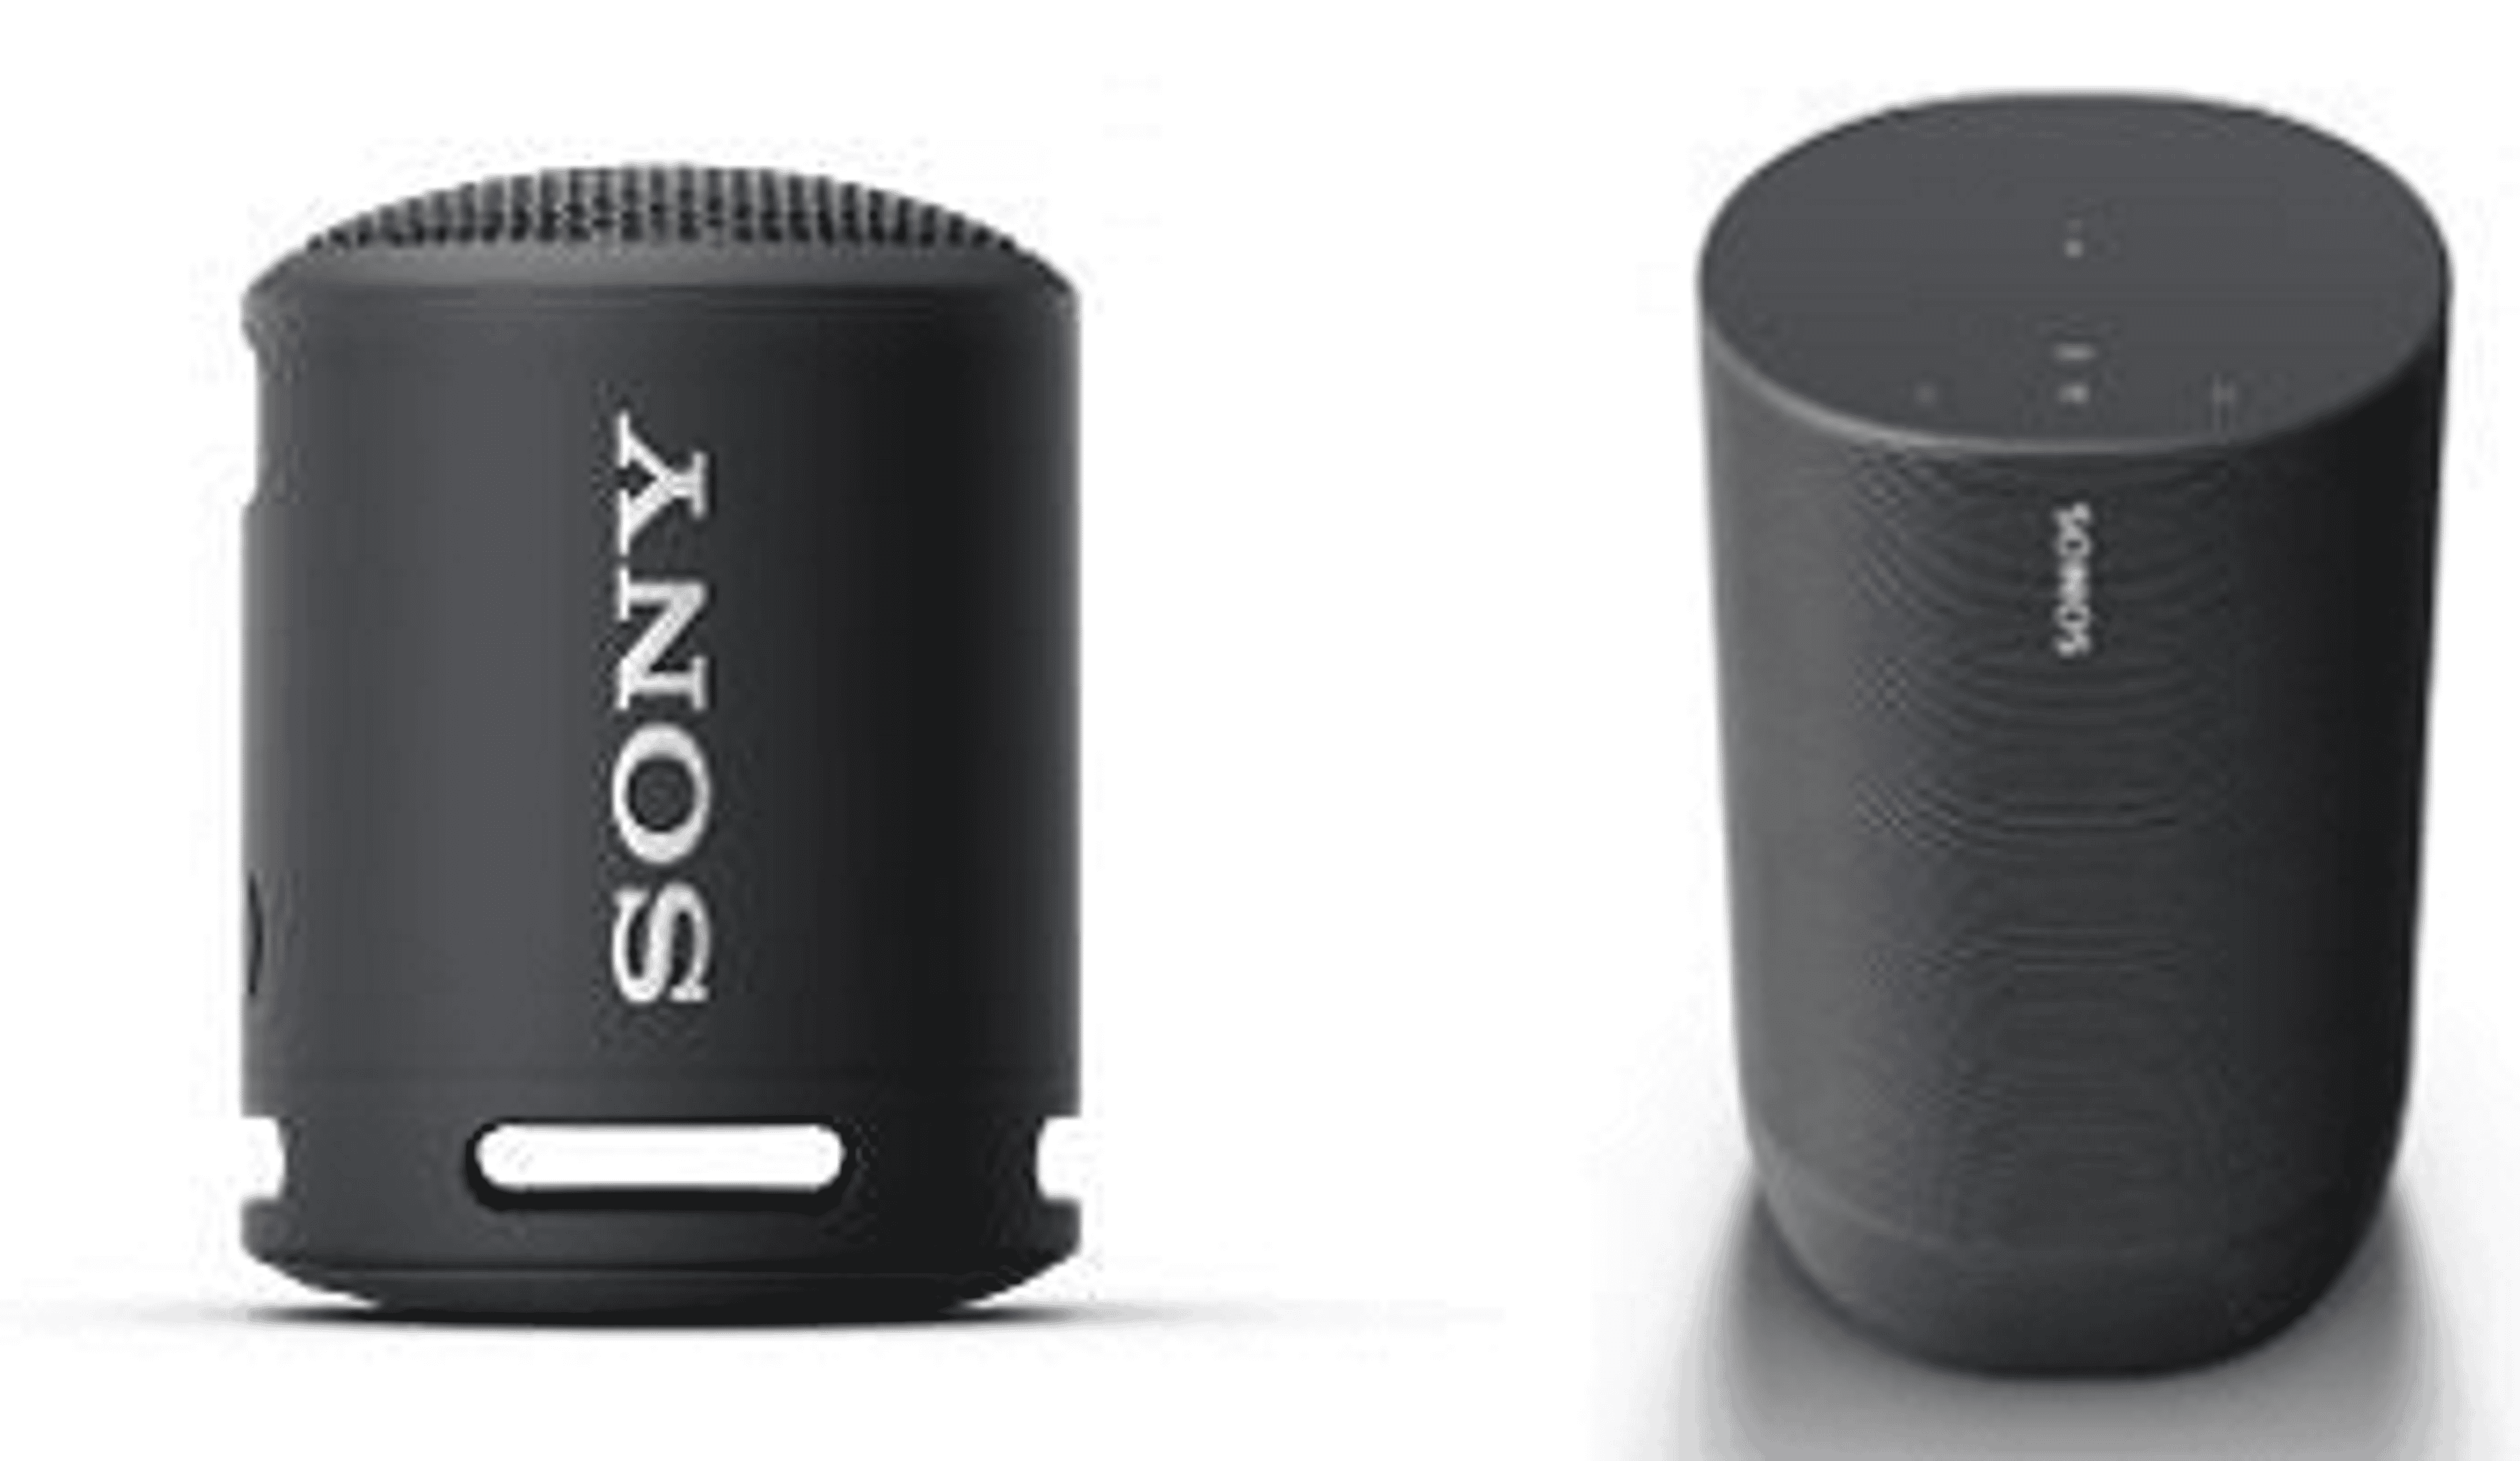  Two Richer Sounds speakers from Sony and Sonos 